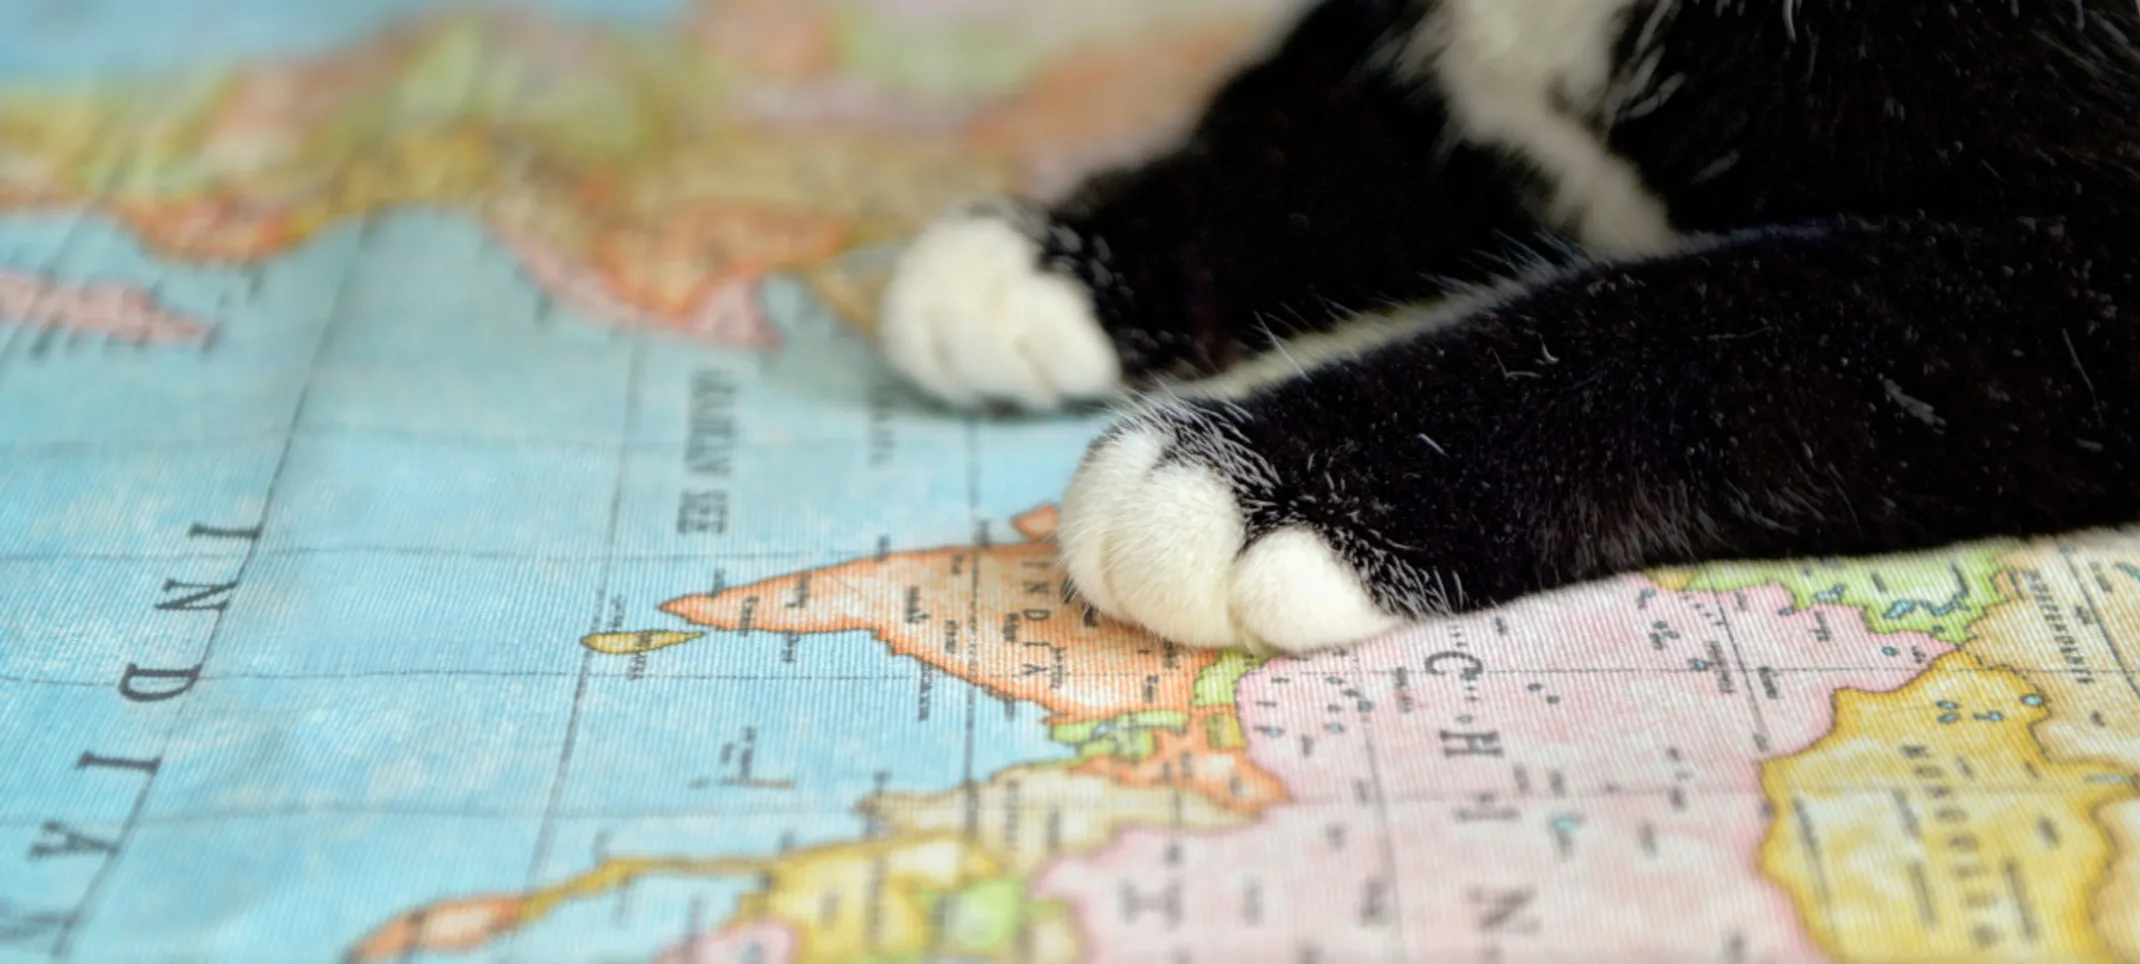 Cat's Paws on a Map Close-Up